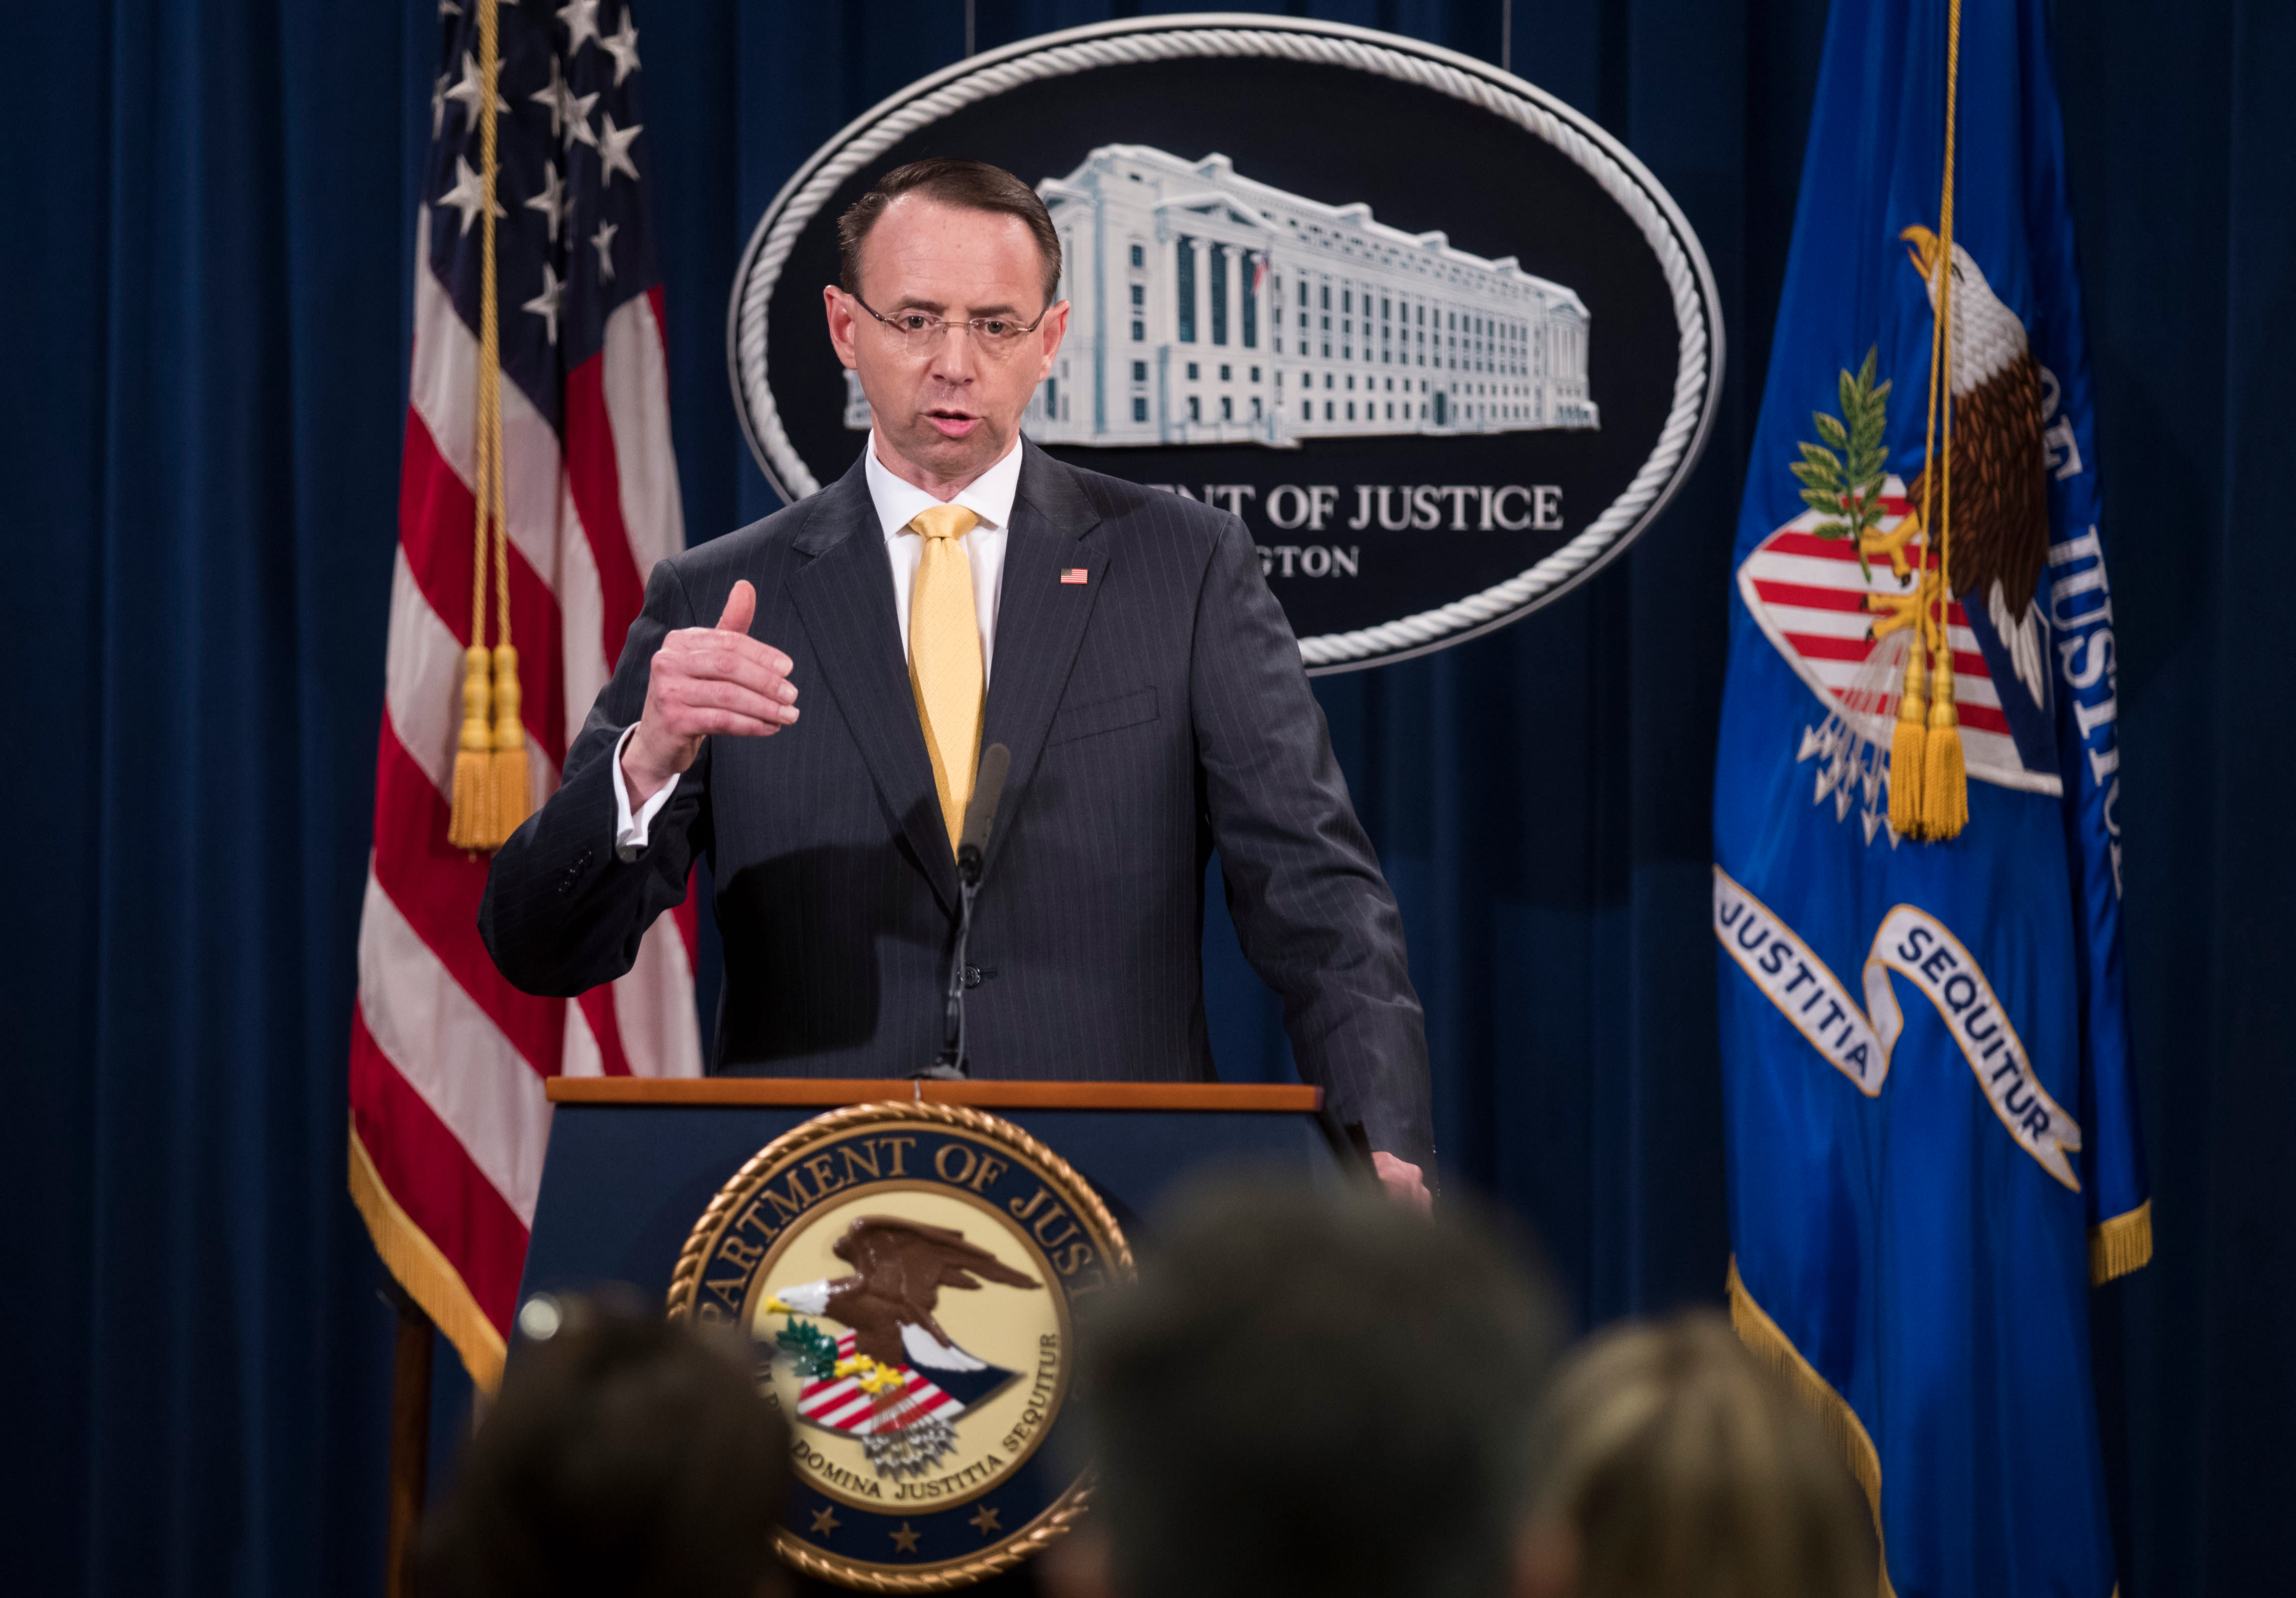 Rod Rosenstein Bombshell: 13 Russians Indicted For Election Meddling To Help Donald Trump